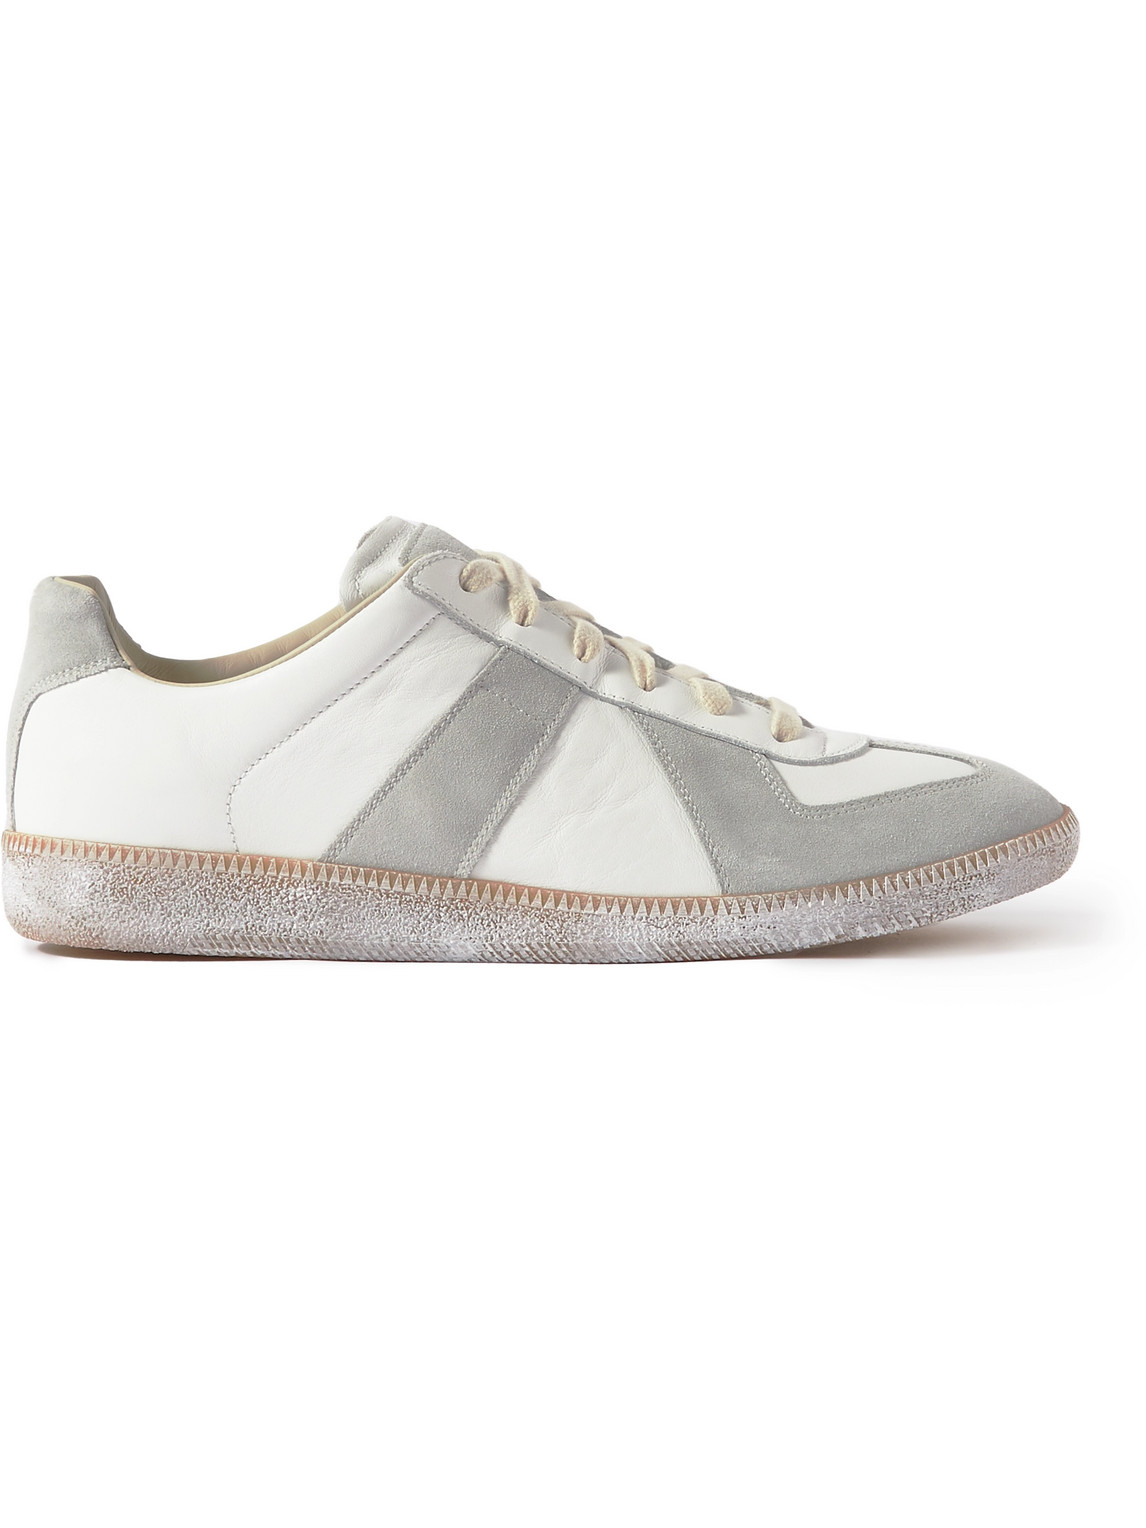 Maison Margiela Replica Distressed Leather And Suede Sneakers In White ...